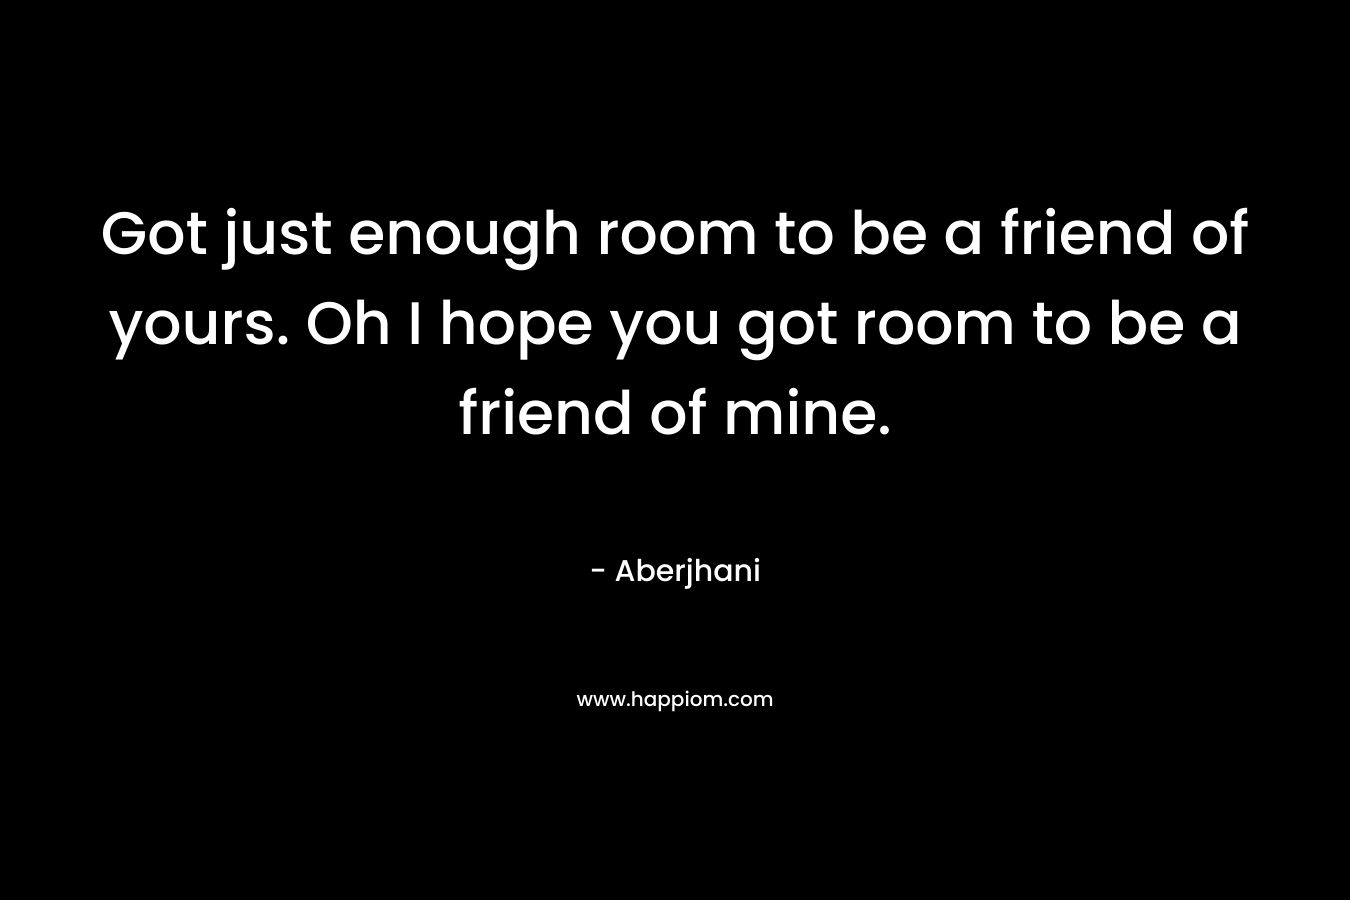 Got just enough room to be a friend of yours. Oh I hope you got room to be a friend of mine. – Aberjhani